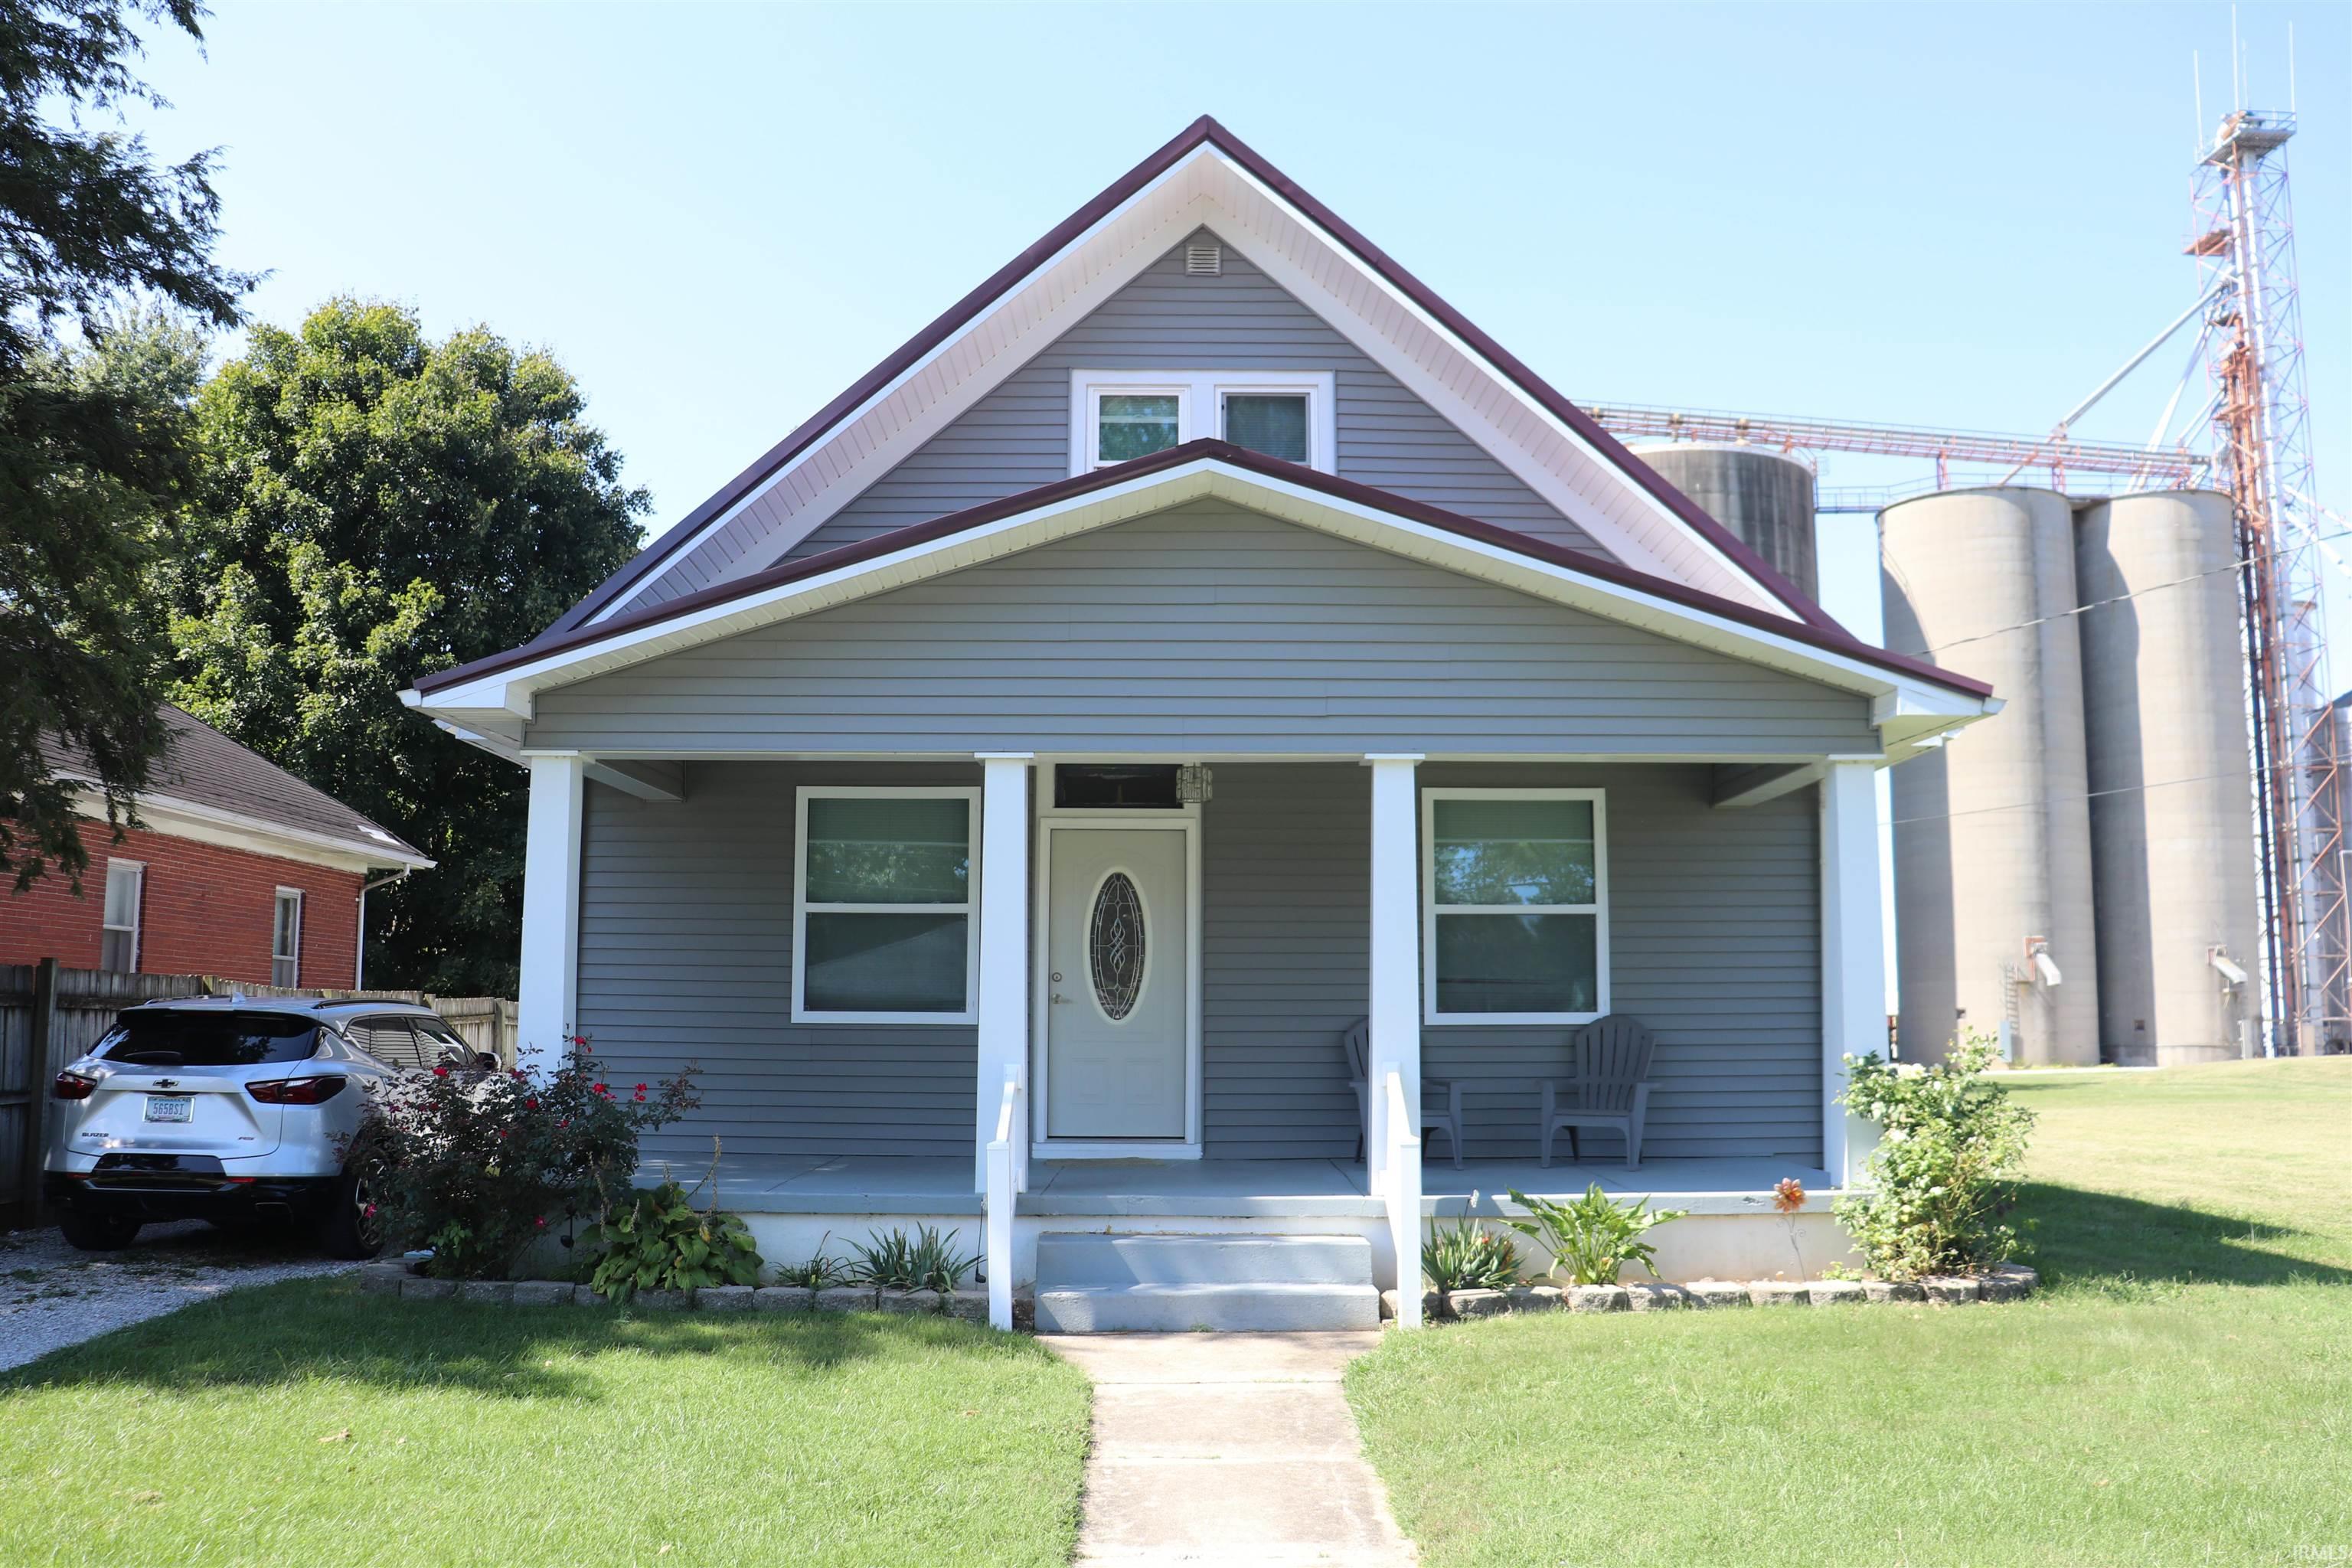 Beautiful remodeled 4 Bedroom and 2 Full Bathroom home in Huntingburg, IN. Home comes with new windows, fresh paint jobs, and new flooring! Also has a full unfinished basement, a patio on the back of the house to relax on, and a bathroom on the main and top floor of the house!